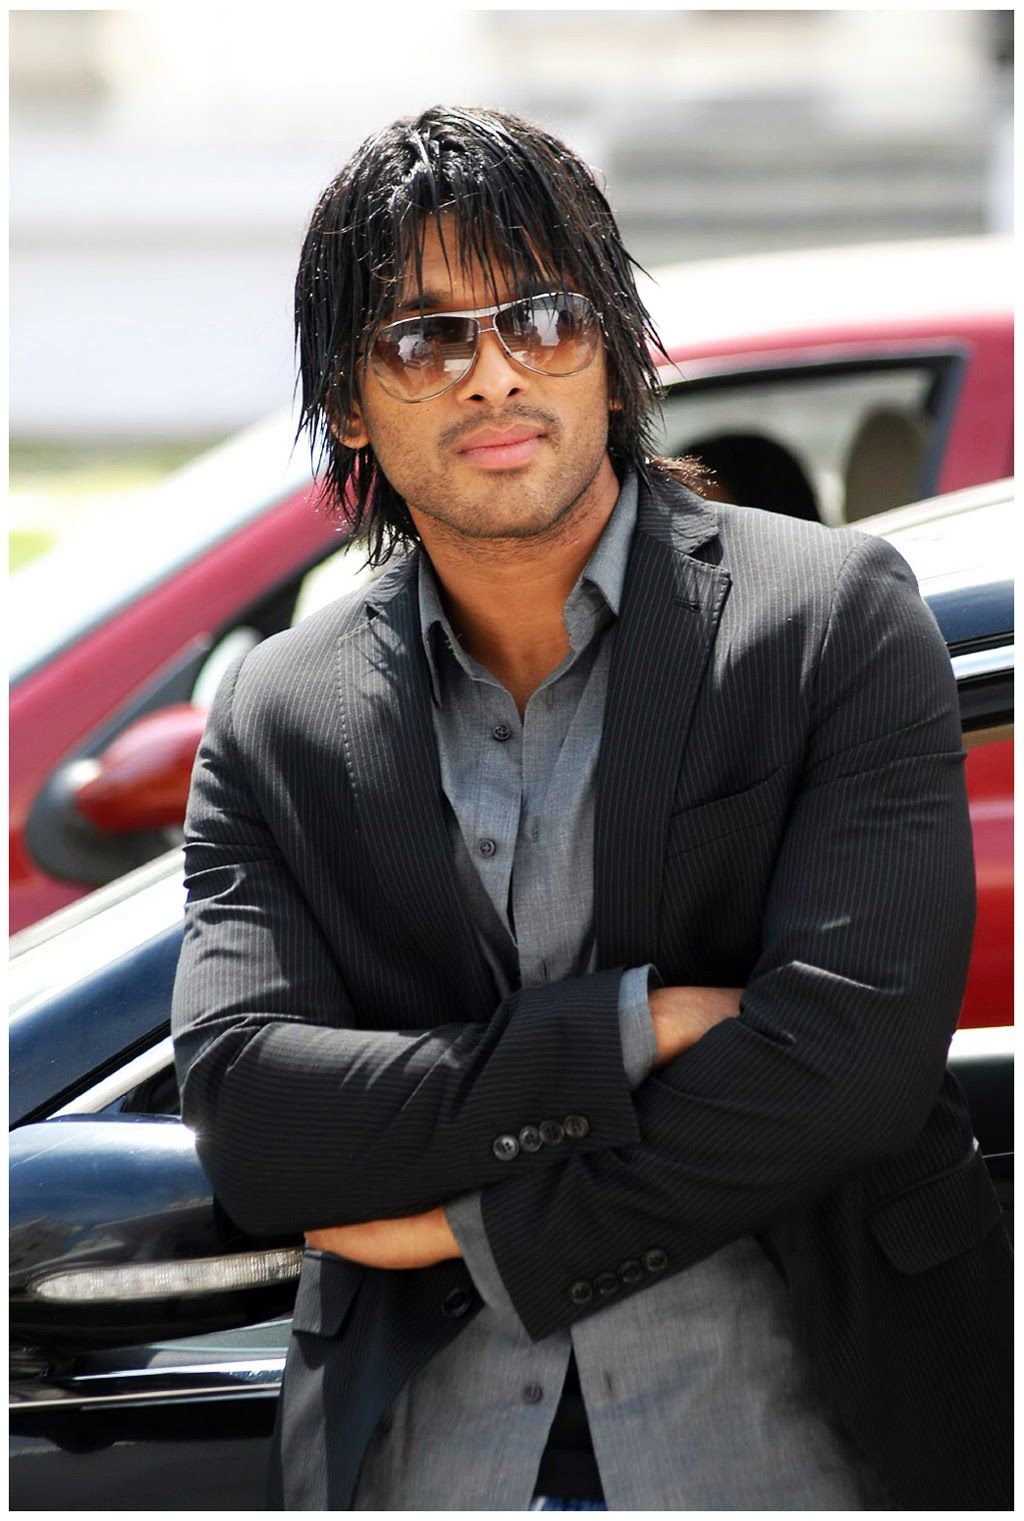 Arya 2 came up during my Bollywood dive, when I discovered Allu Arjun to be a perfect image of how I mentally capture t. Prabhas actor, Actor photo, Actors image